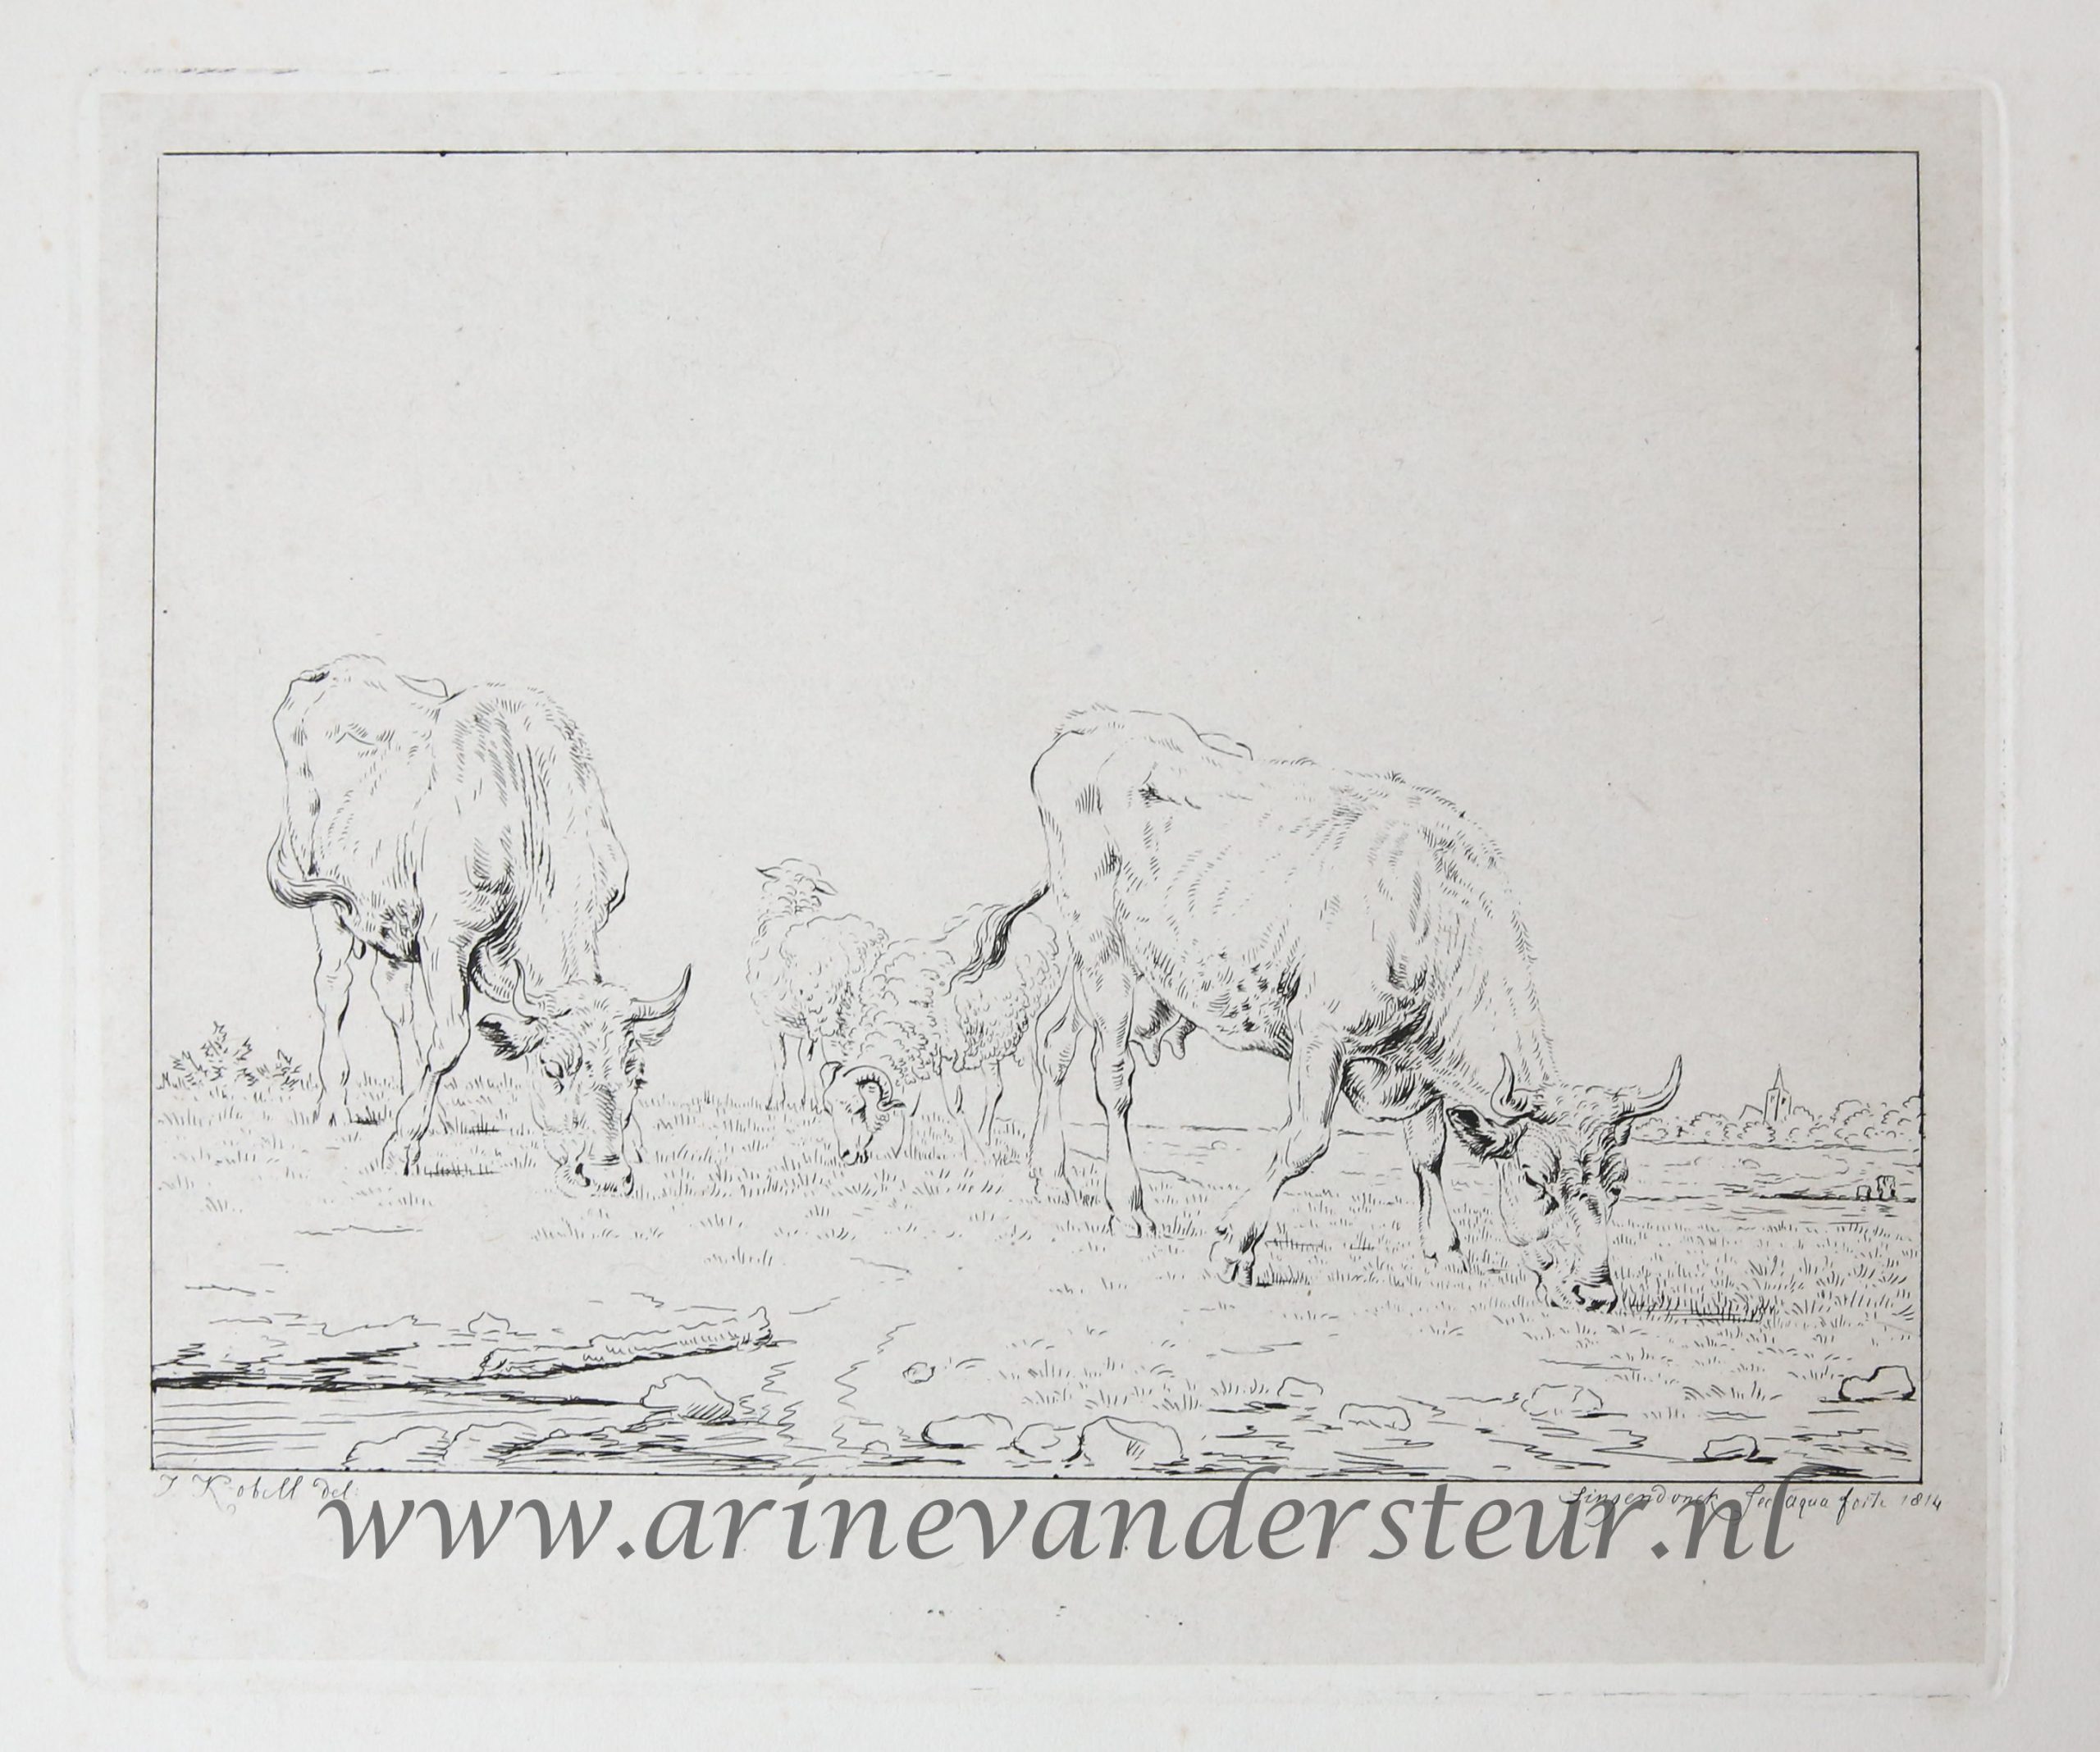 [Etching on chine collé/ets op chine-collé] Two cows and two sheep/Twee koeien en twee schapen.